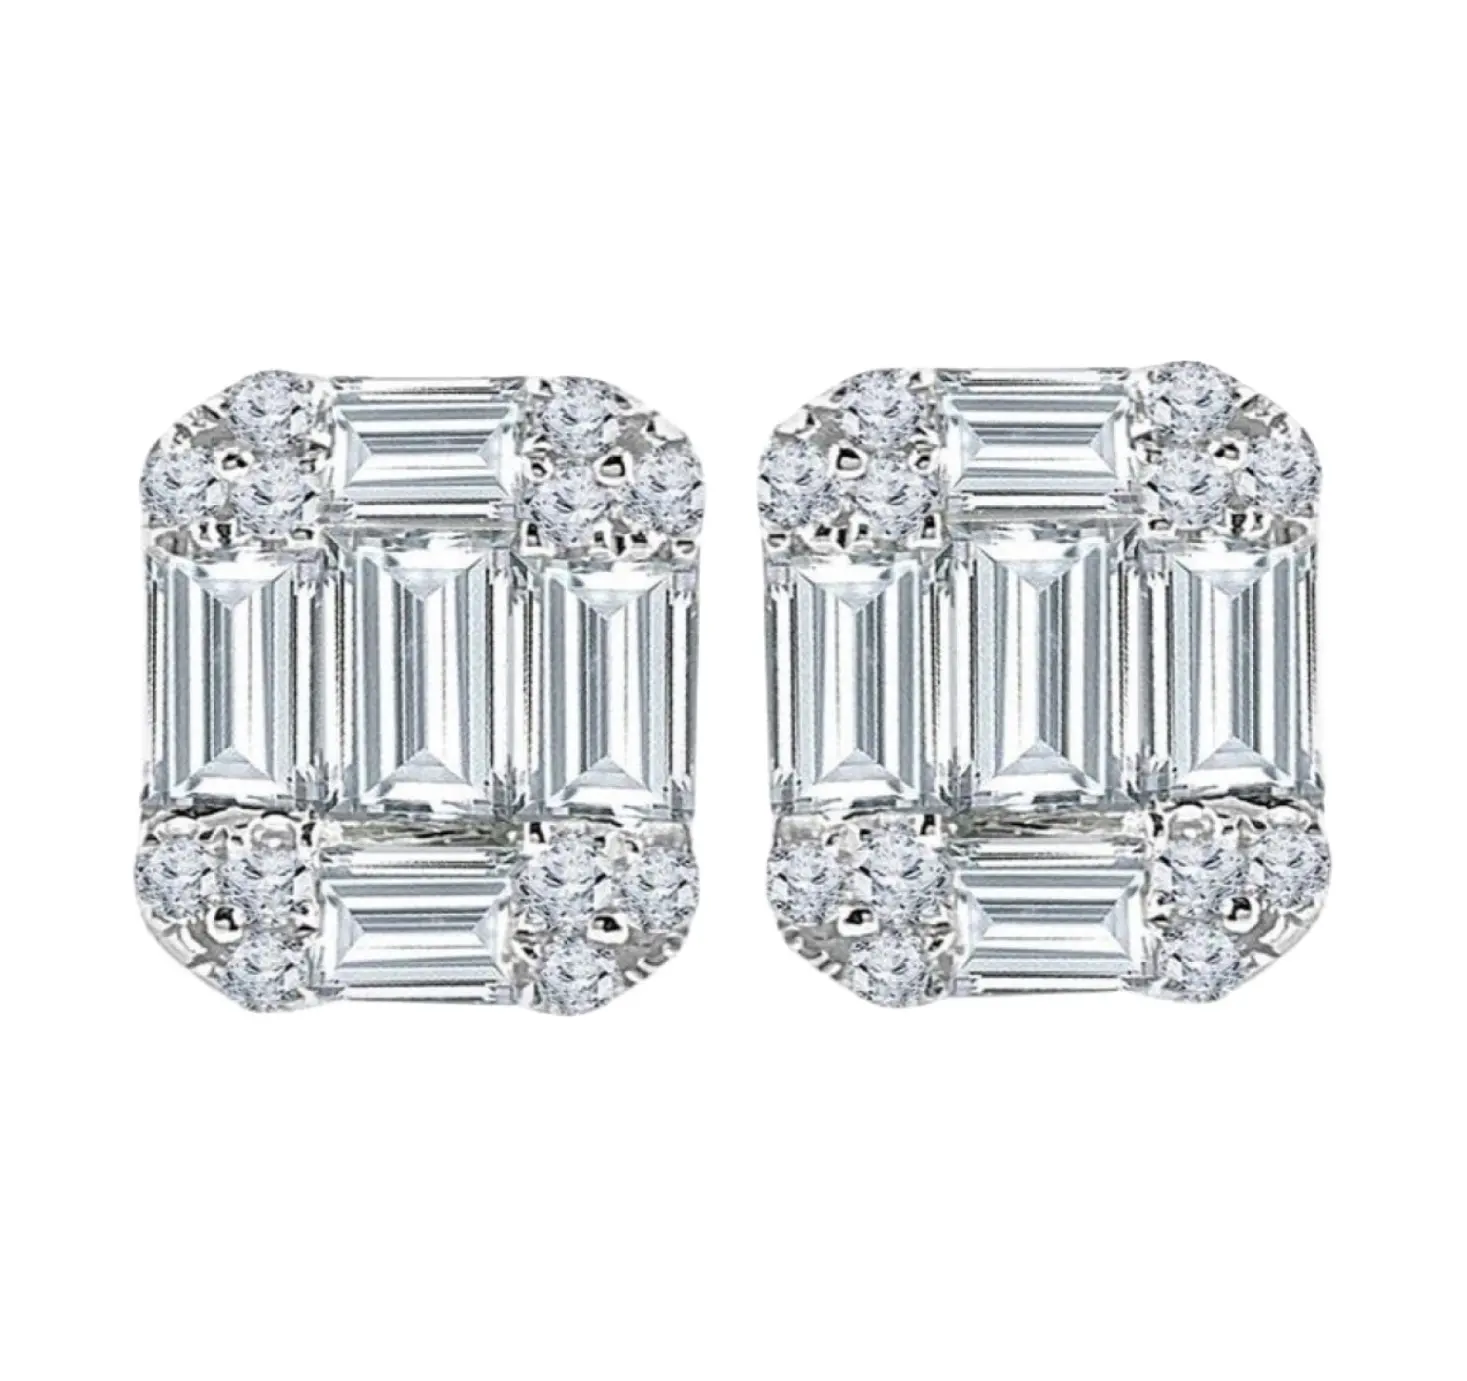 High Quality Elegant Earrings in white gold with natural diamonds fine earring for Girl and Woman